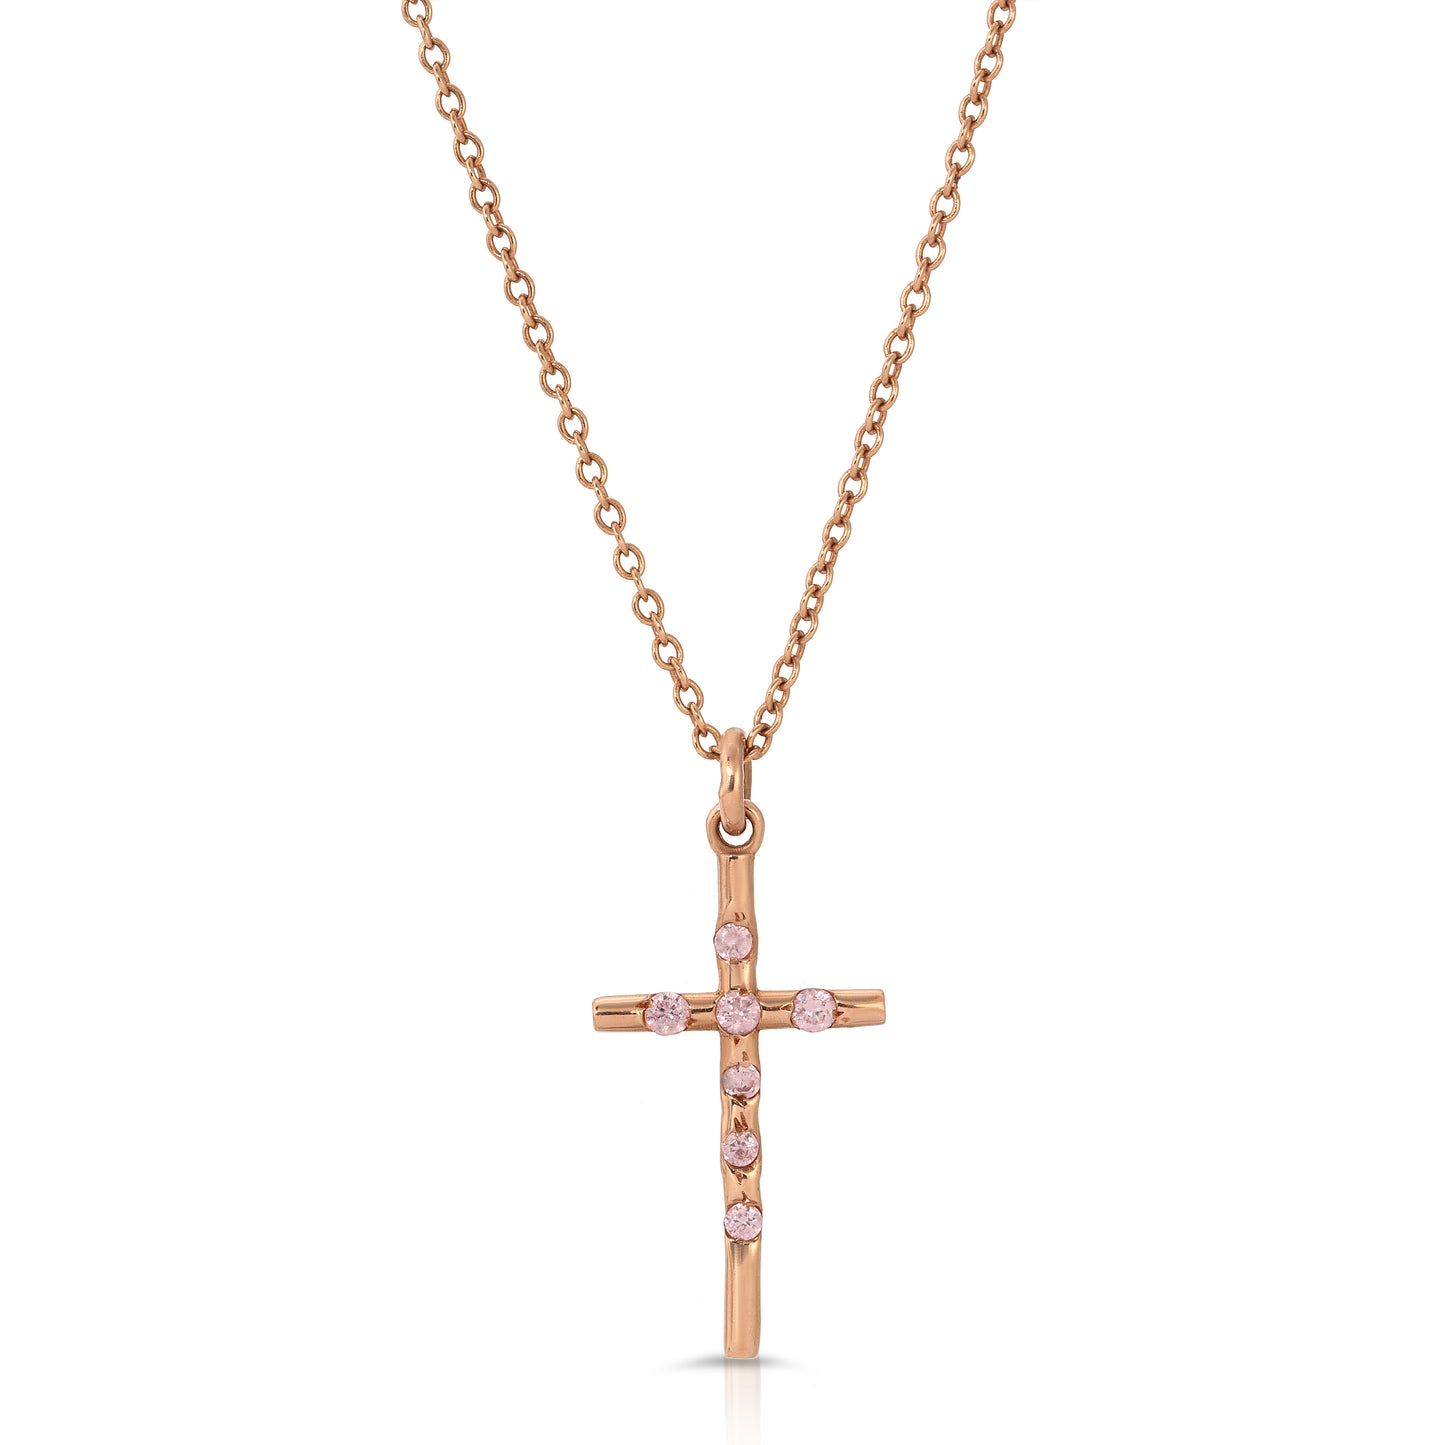 Rose Gold Cross necklace with 7 pink sapphires